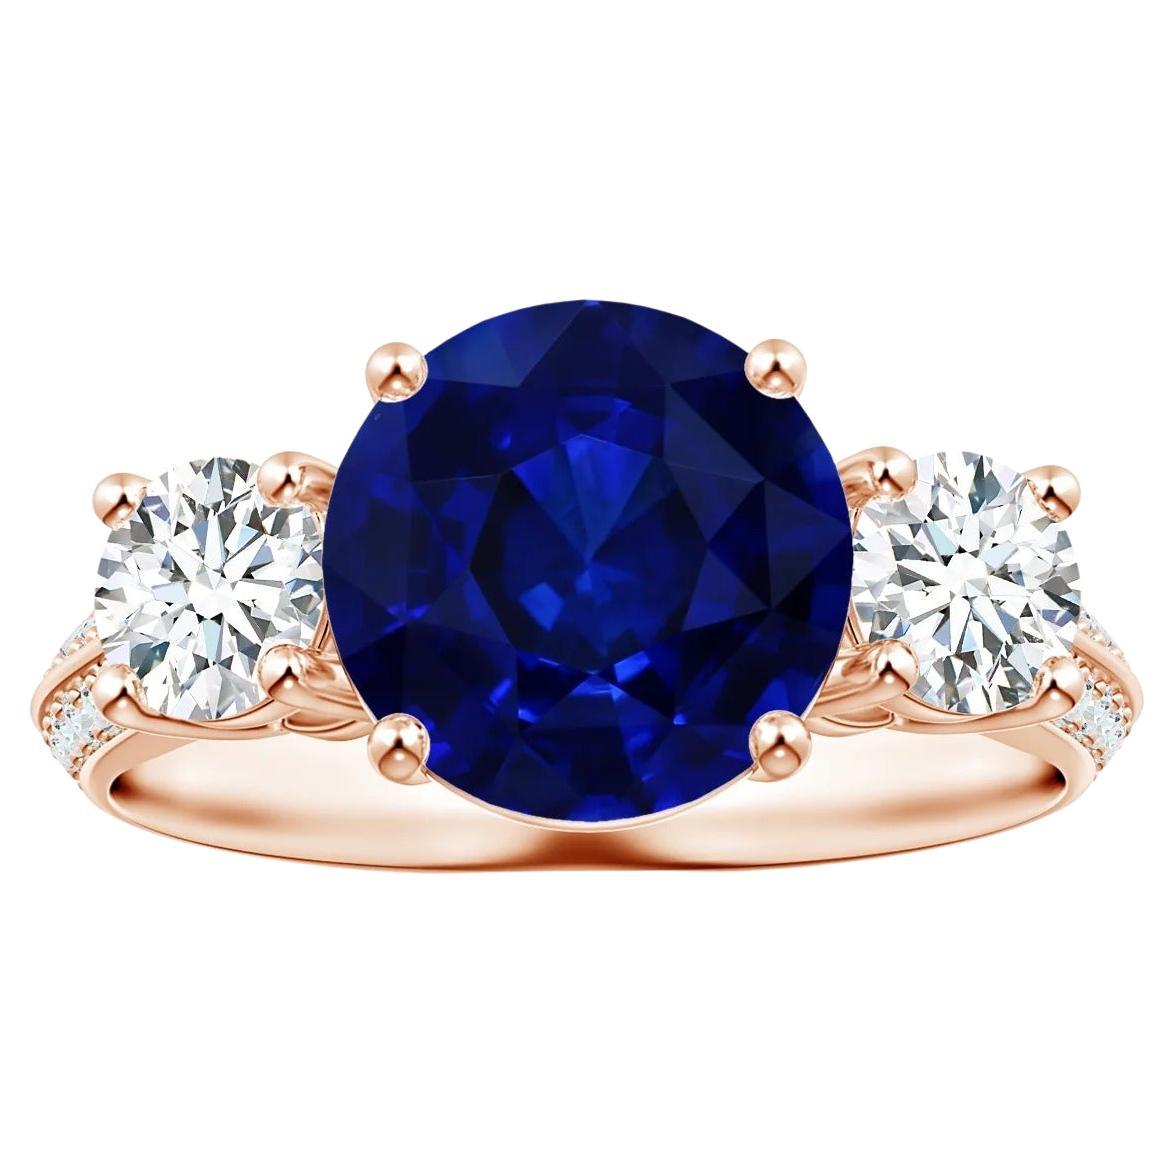 For Sale:  Angara GIA Certified Natural Blue Sapphire Ring in Rose Gold with Diamonds